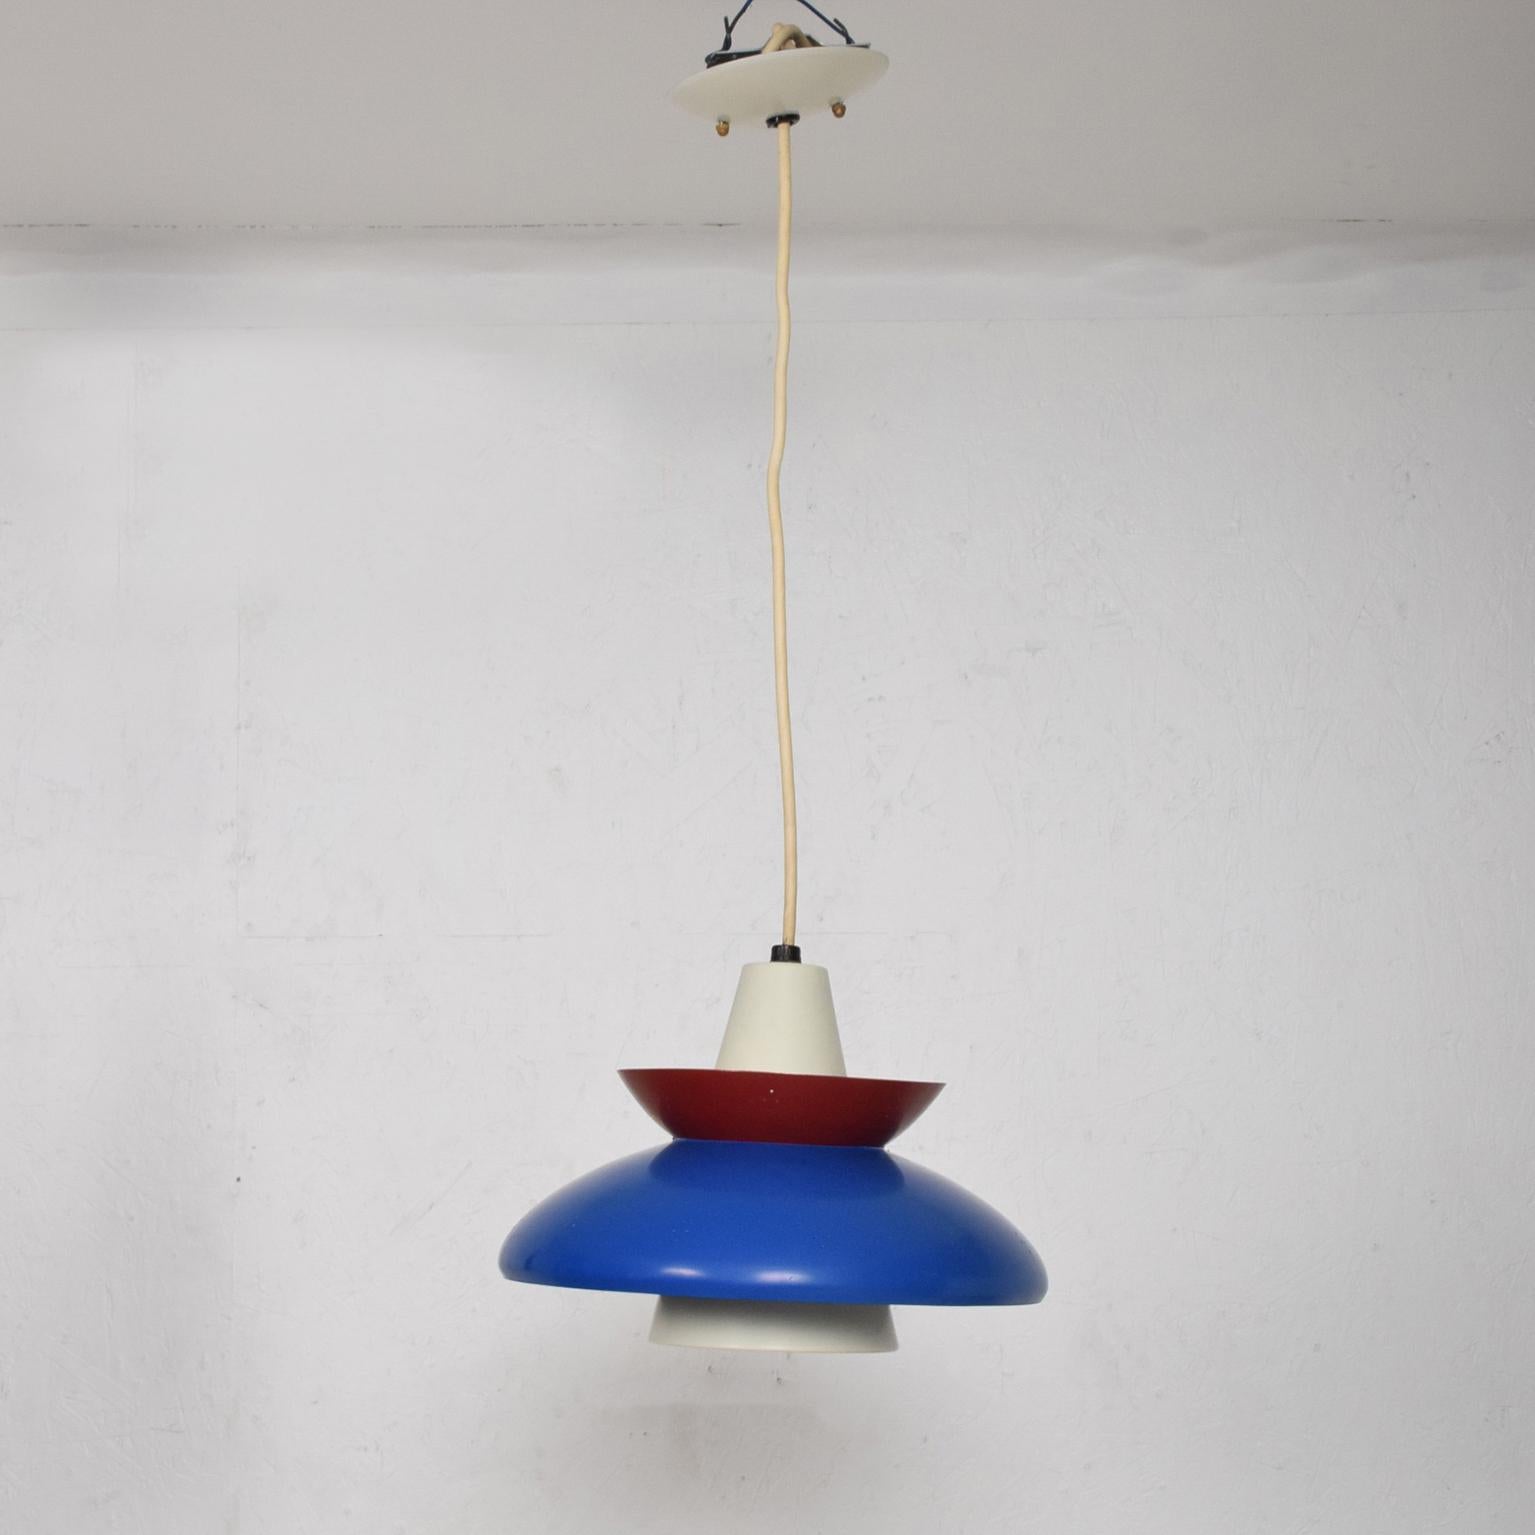 Patriotic pendant light in a sculptural shape USA colors.
Made in America, circa late 1950s.
Dimensions: 9